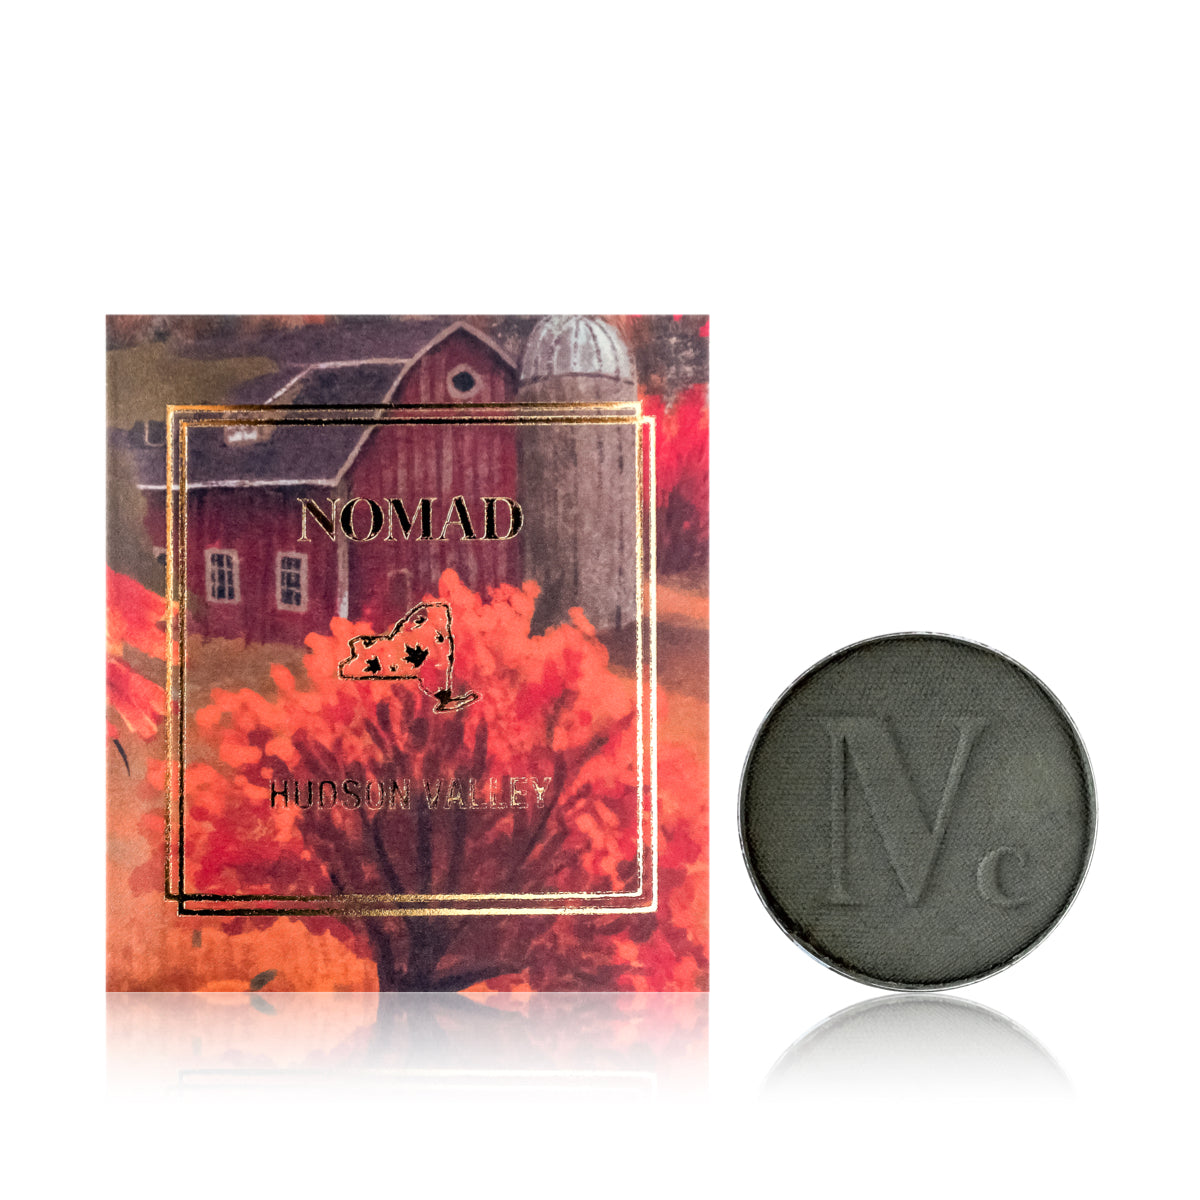 NOMAD x Hudson Valley Intense Color Pigment in Bed & Breakfast